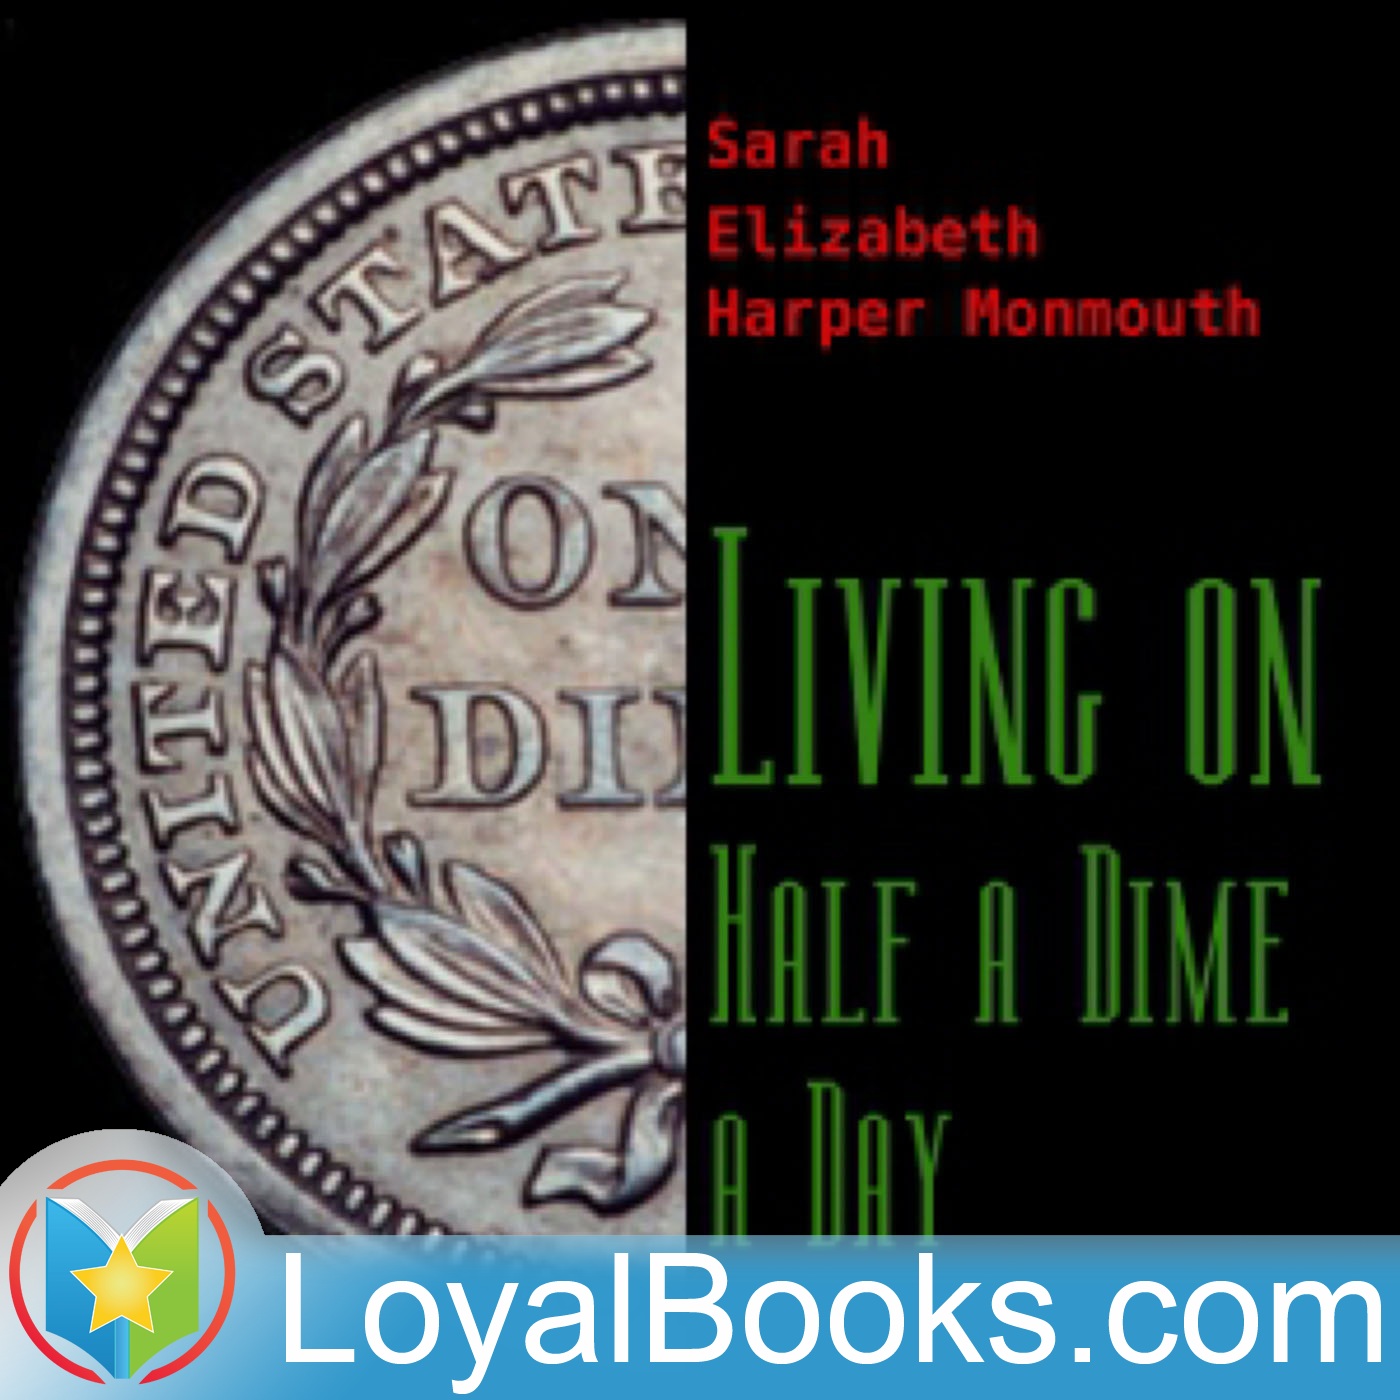 Living on Half a Dime a Day by Sarah Elizabeth Harper Monmouth